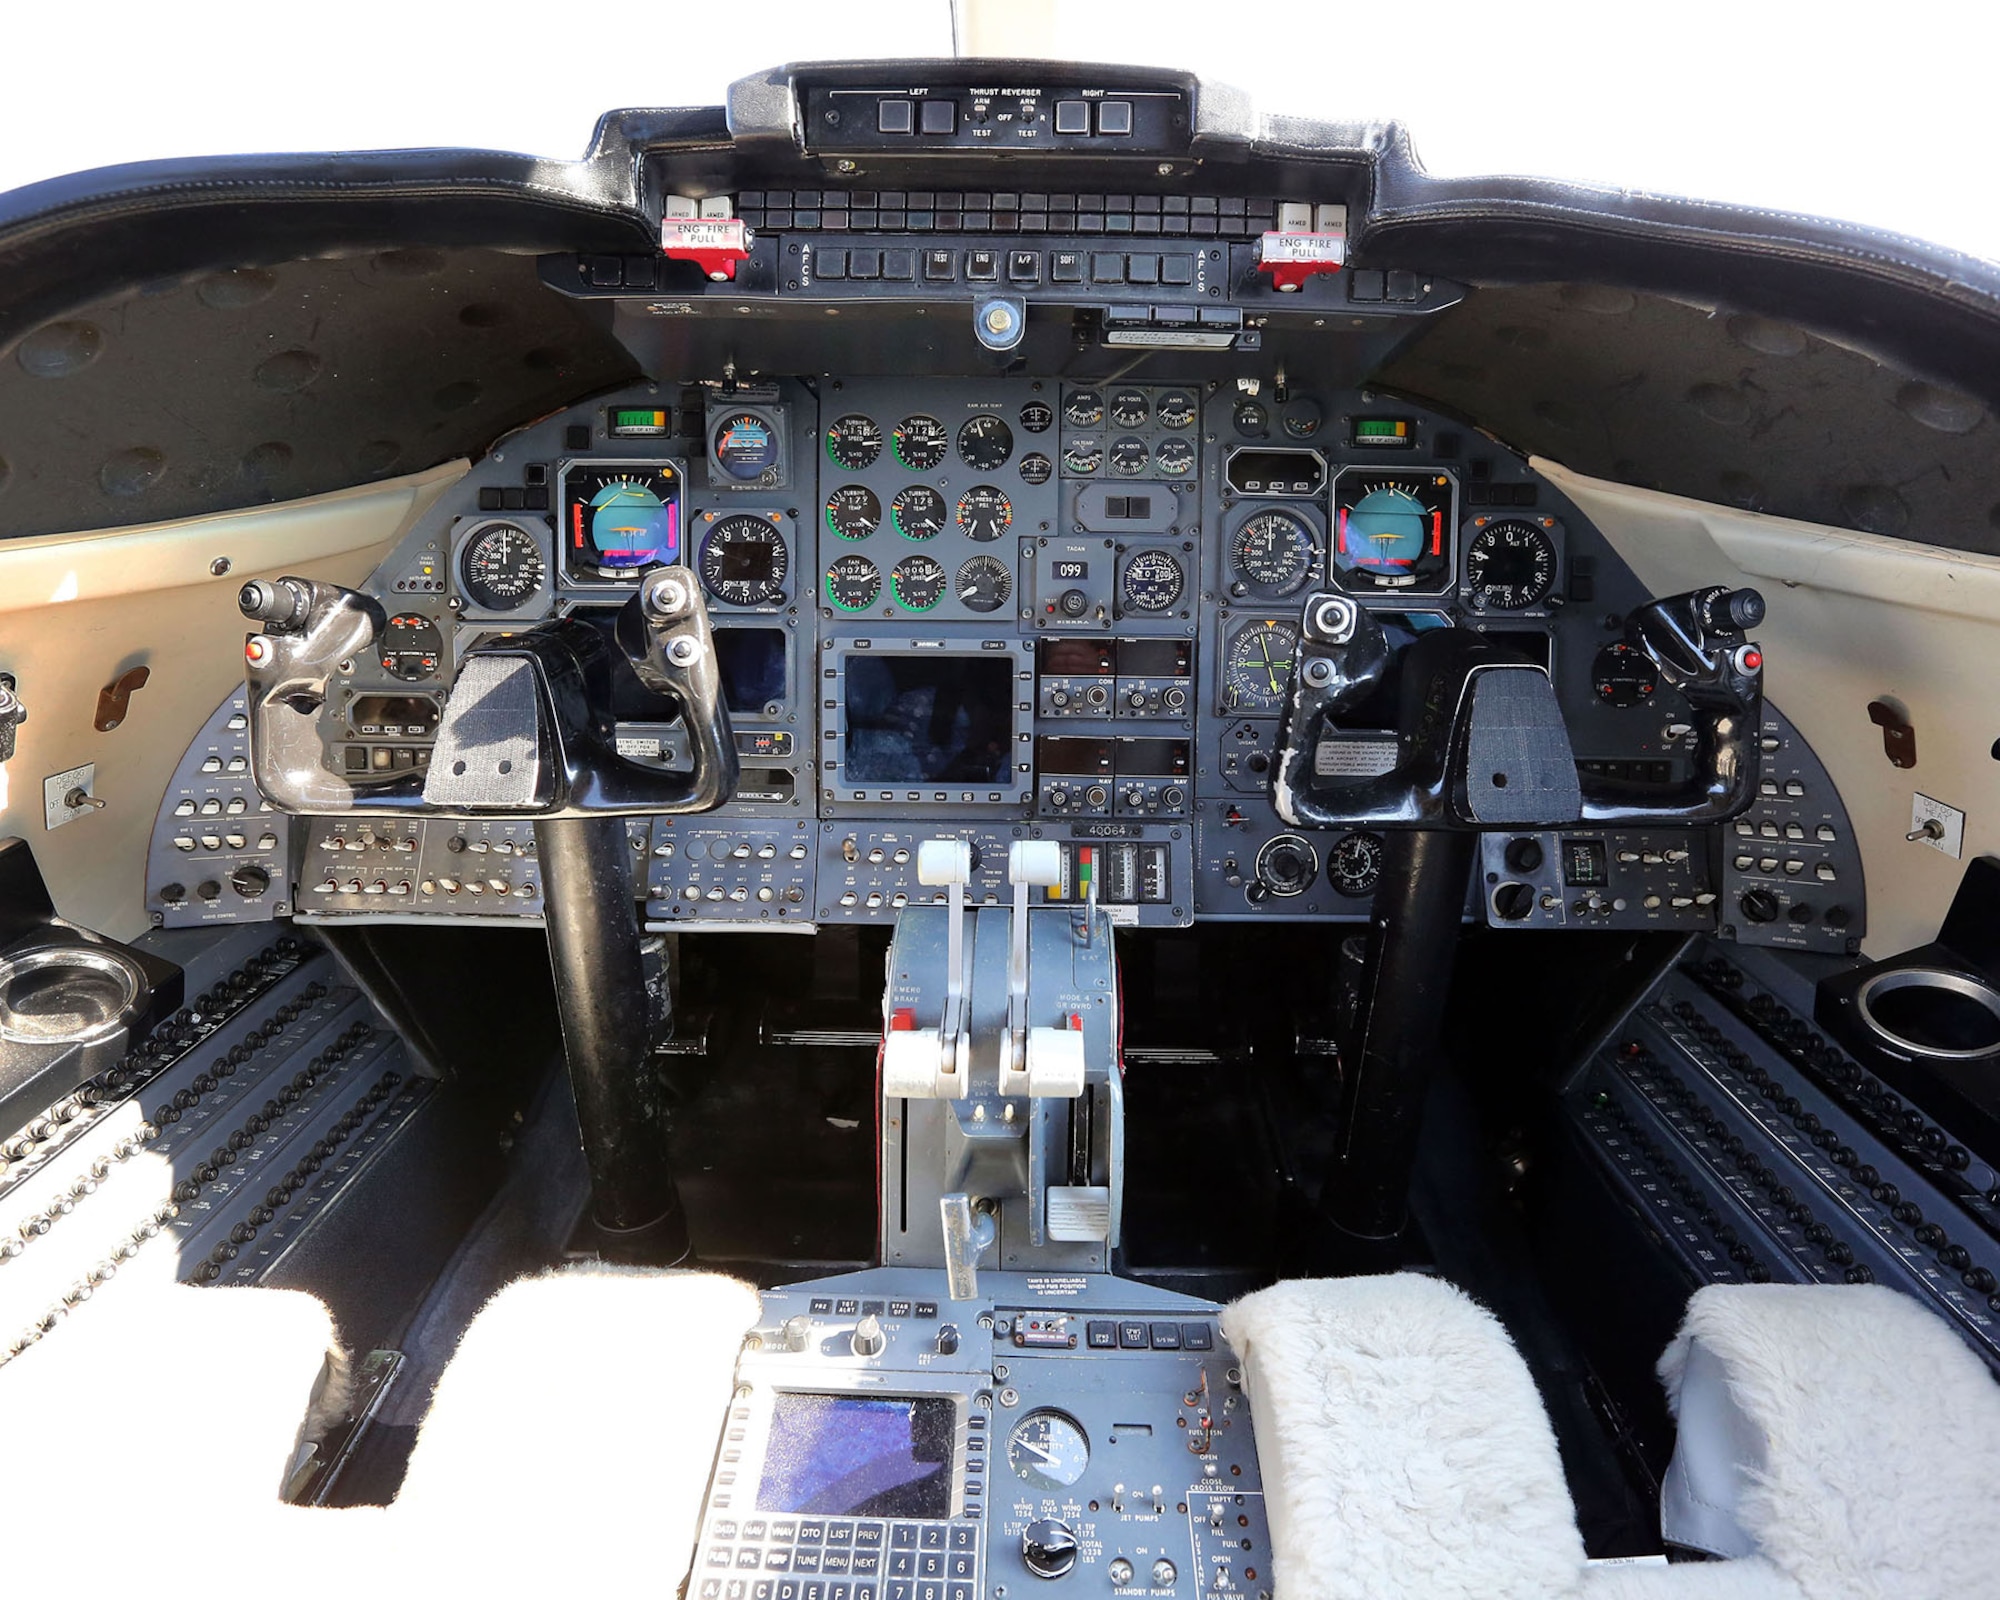 DAYTON, Ohio -- Learjet C-21A cockpit at the National Museum of the U.S. Air Force. (U.S. Air Force photo by Don Popp)